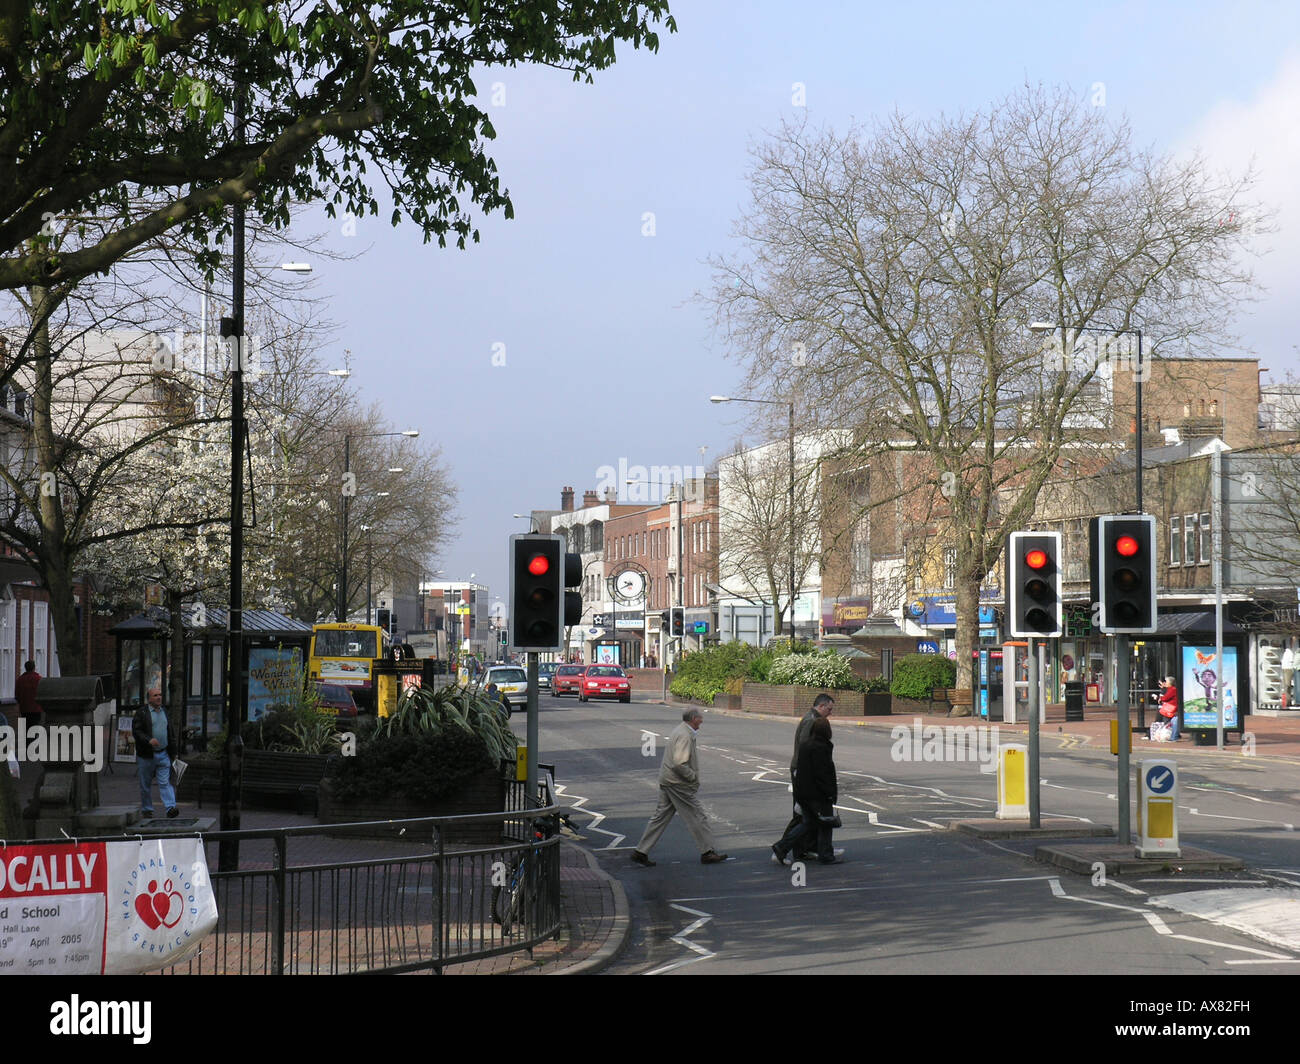 brentwood main high street A1023 through town centre england uk gb Stock Photo